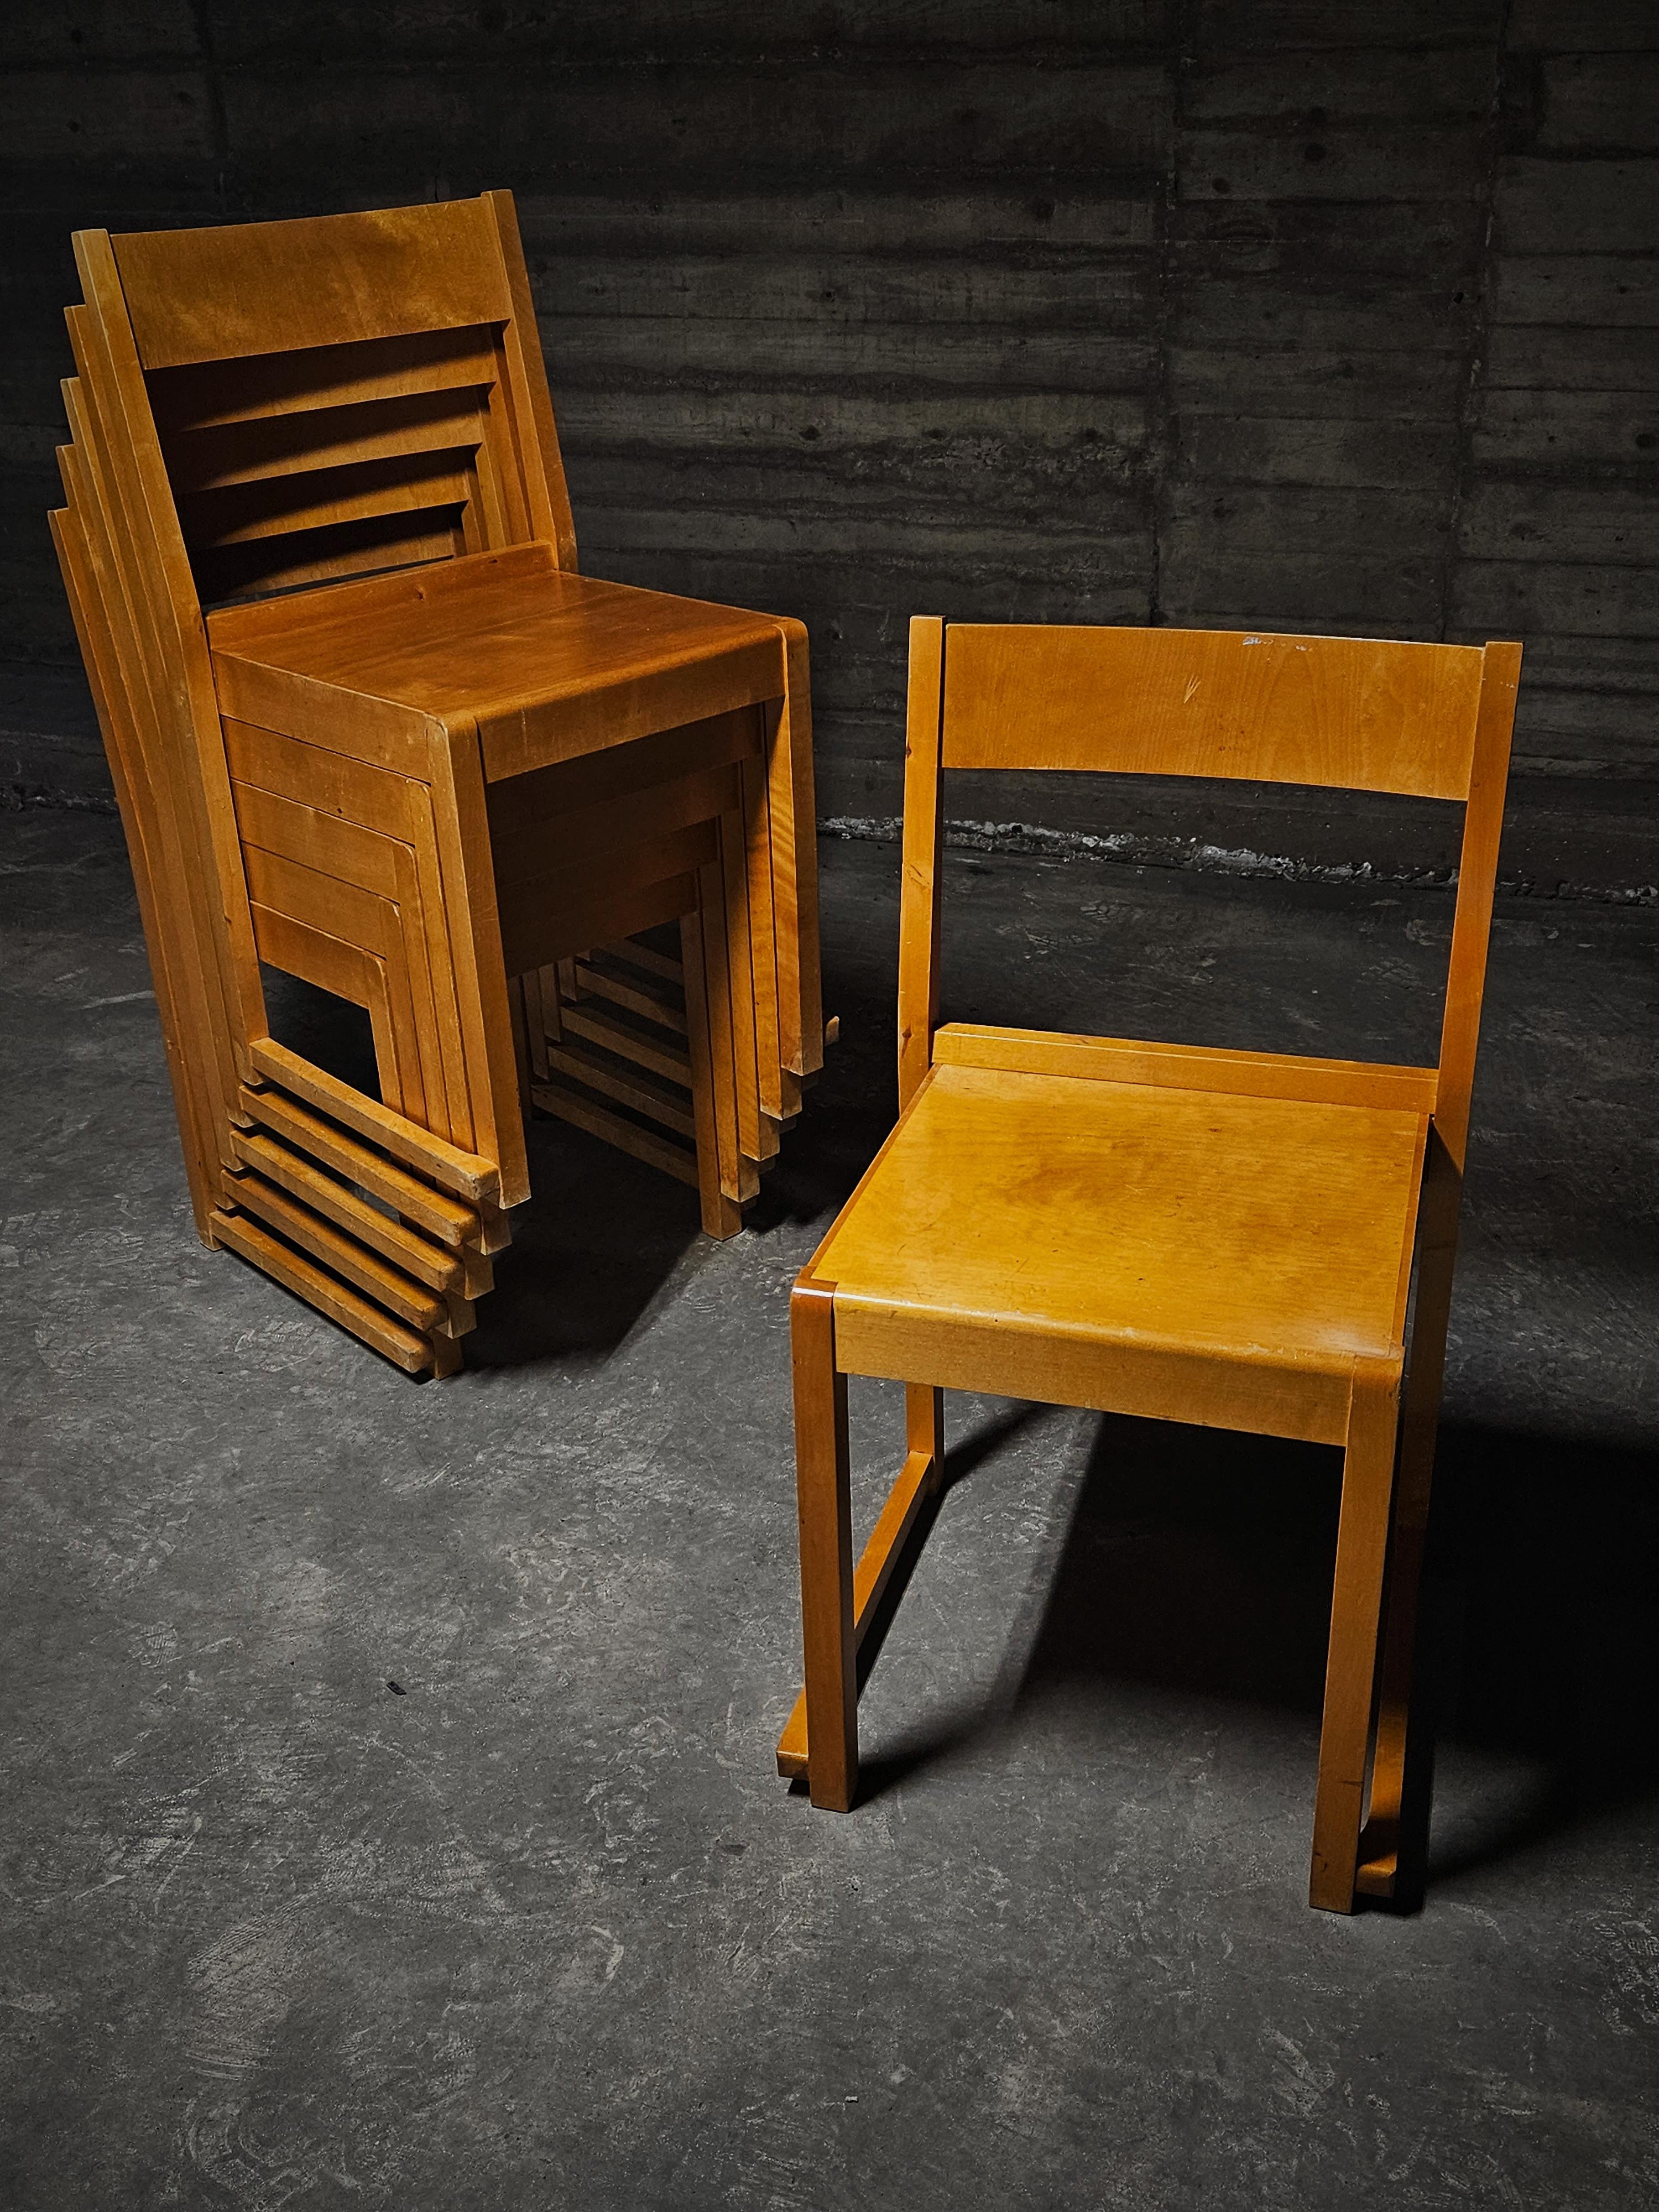 Functionalistic stackable dining chairs model 'Orchestra' designed by Sven Markelius, Sweden, 1930s. 

These chairs feature a minimalist modern design, the chair backs are composed of hardwood birch while the seat is made up of bent plywood.